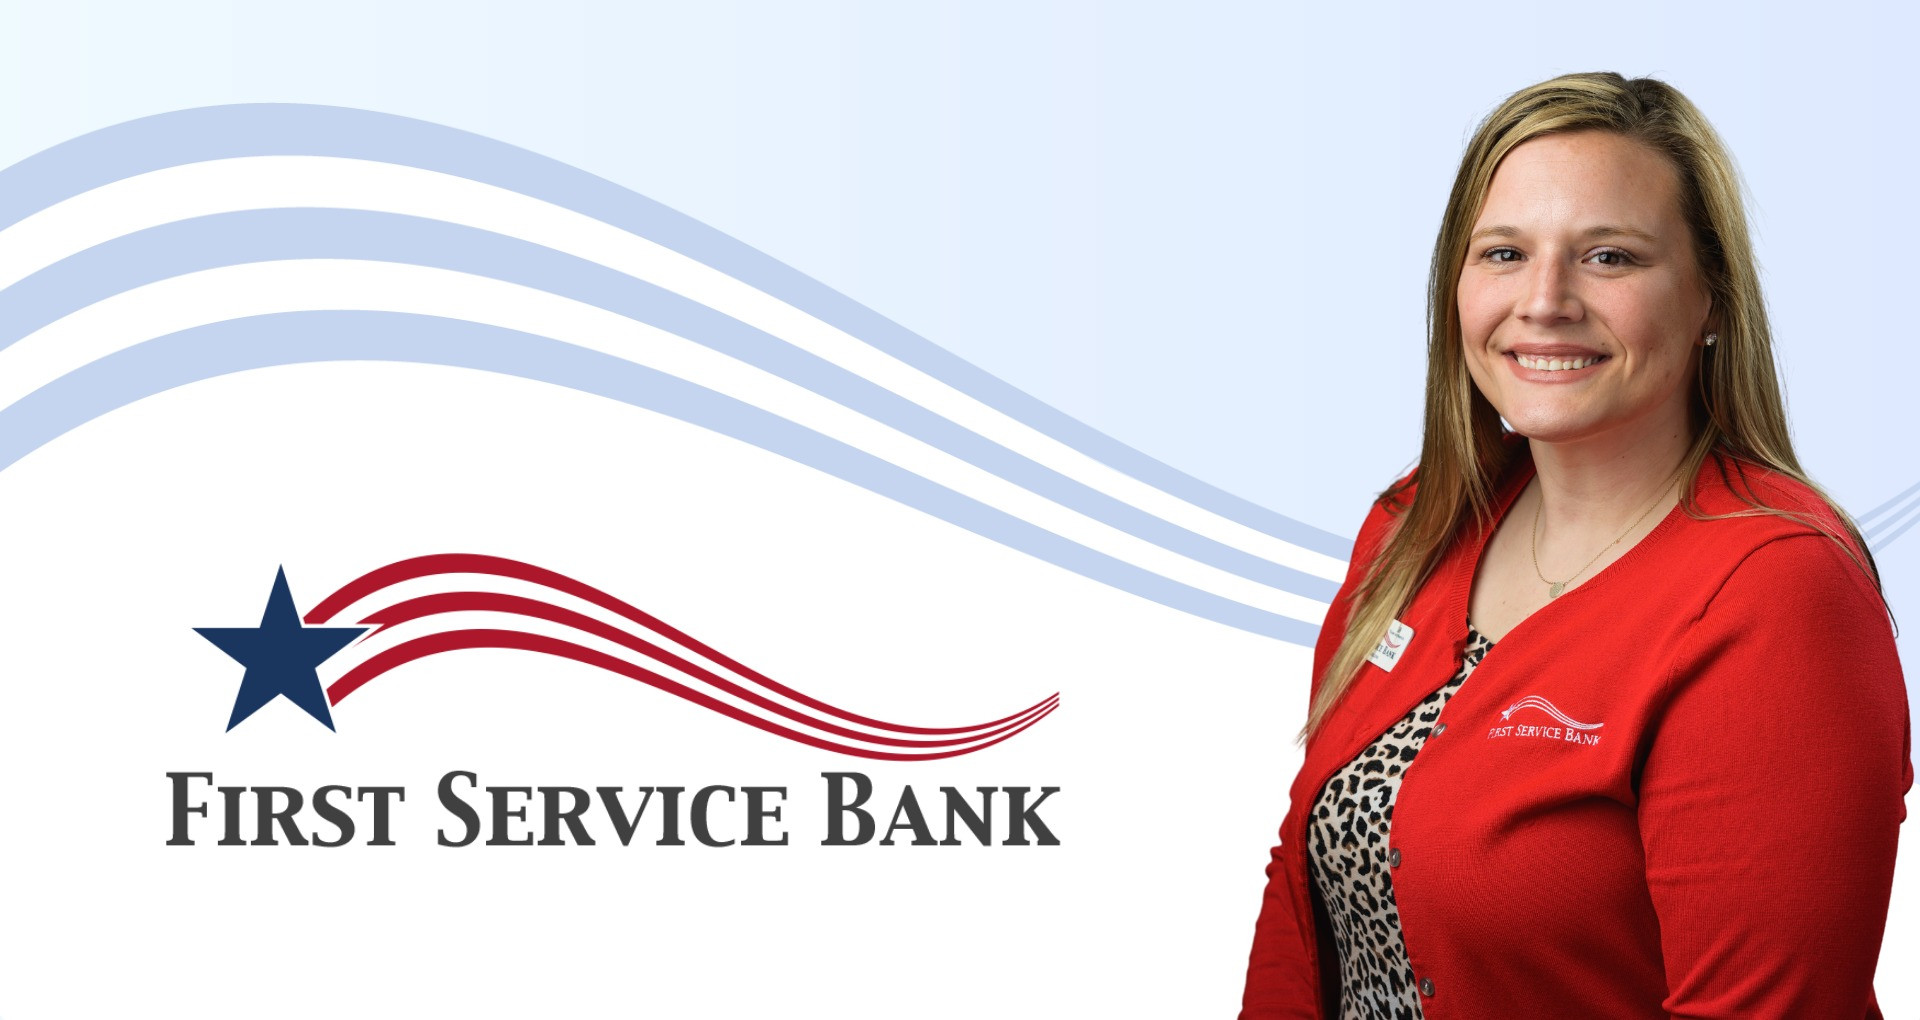 First Service Bank Announces April Collins' Promotion to Manager of Clinton and Mountain View Locations